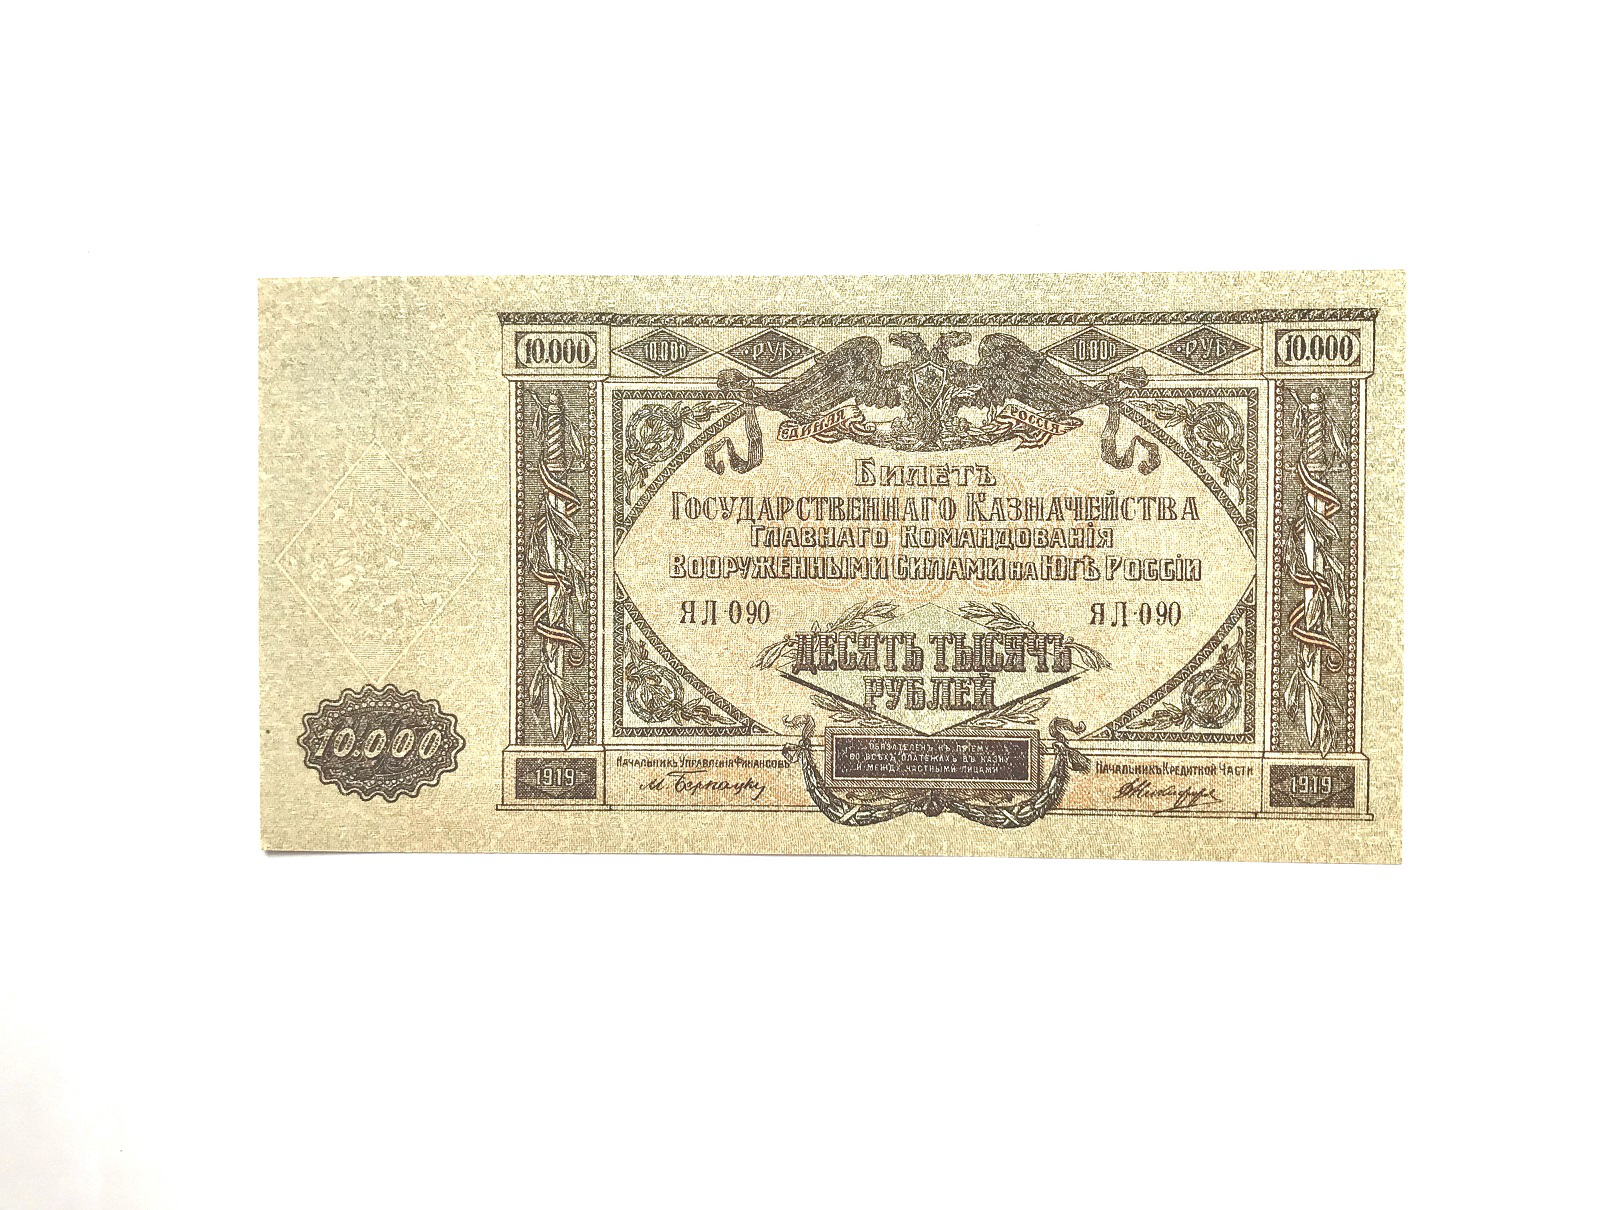 10,000 rubles banknote, 1919, Russia | Hobby Keeper Articles